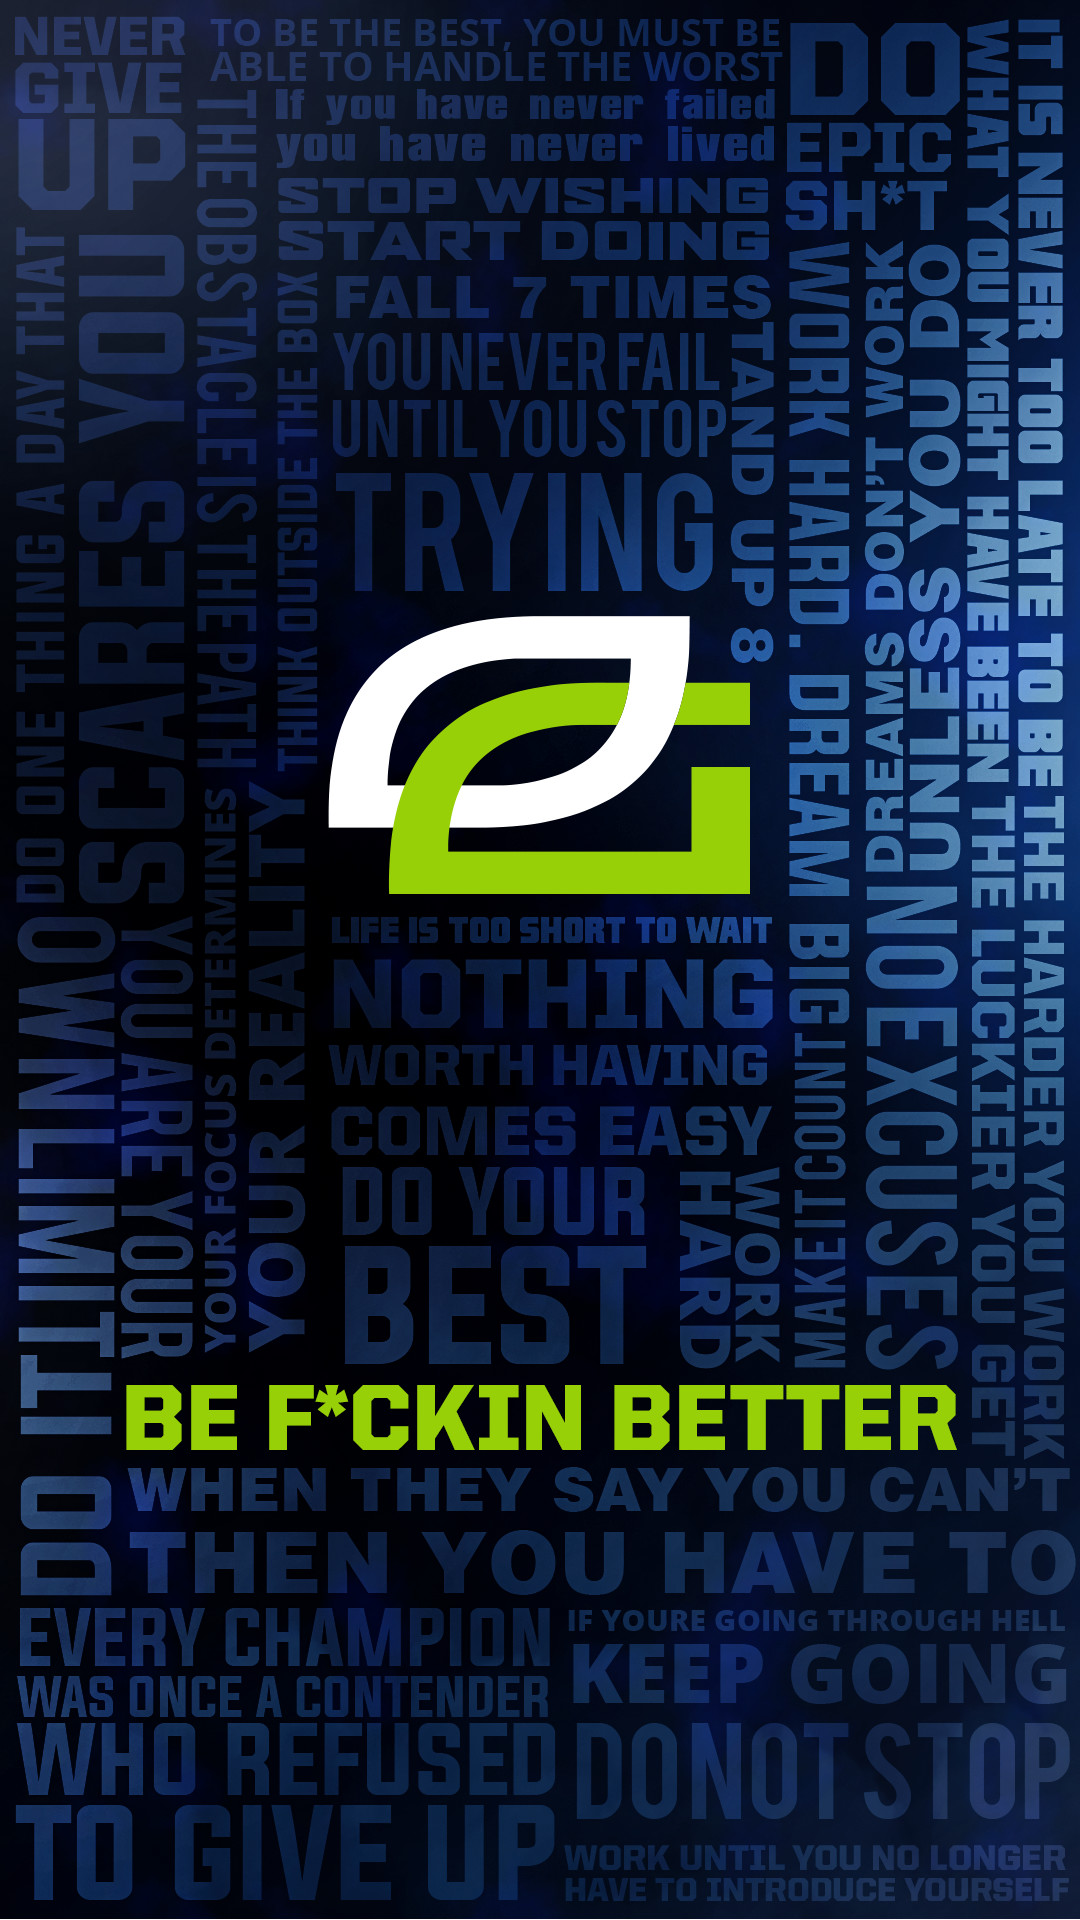 1080x1920 OpTic Xobe on Twitter: "Phone wallpaper for @OpTicGaming! Main quote by the  one and only @OpTic_Crimsix Hope you guys like it!